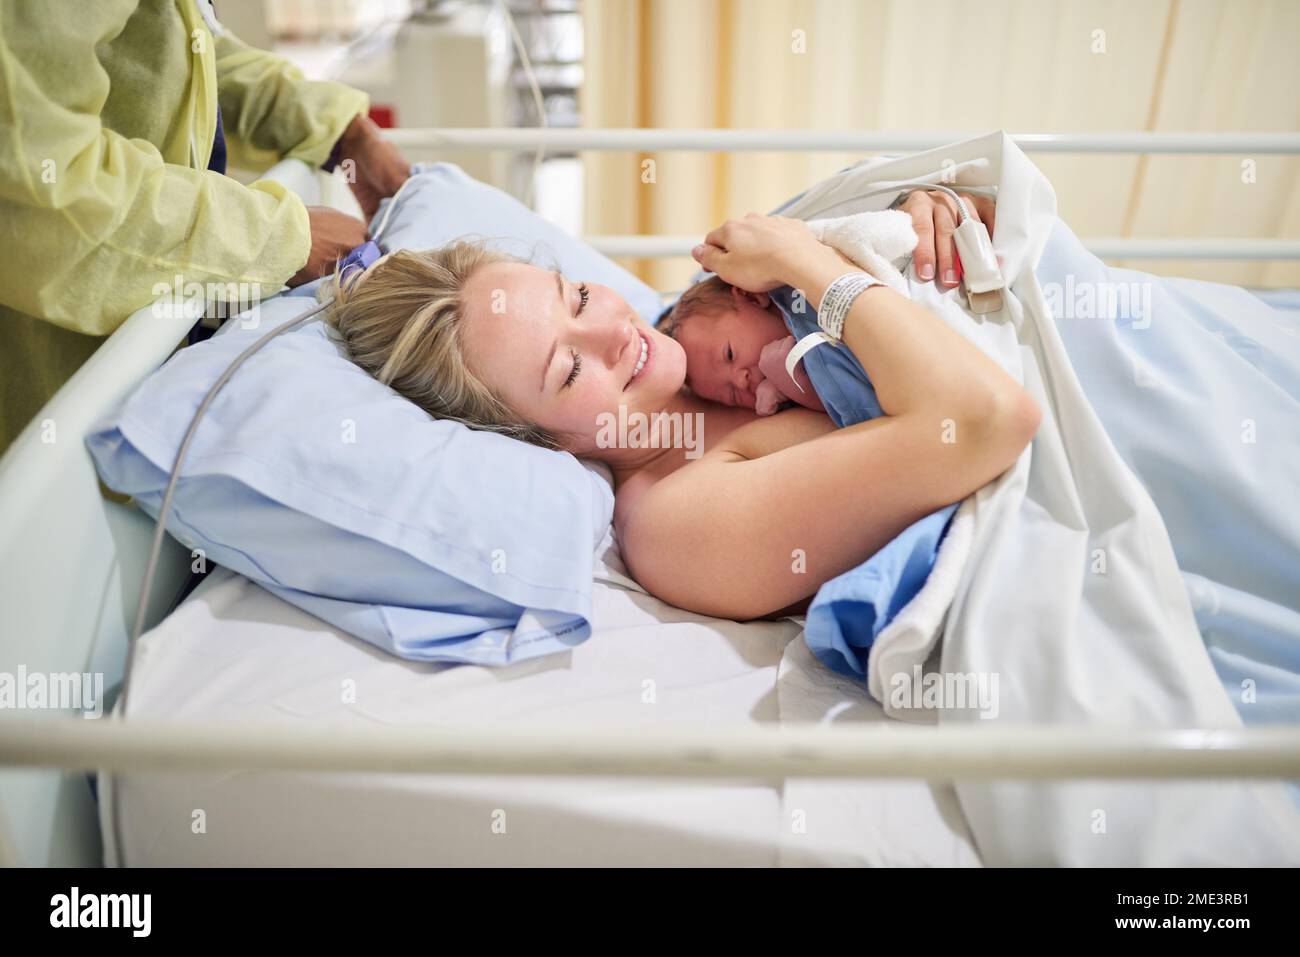 The greatest joy on earth. a beautiful young mother lying in bed with her newly born baby girl in the hospital. Stock Photo